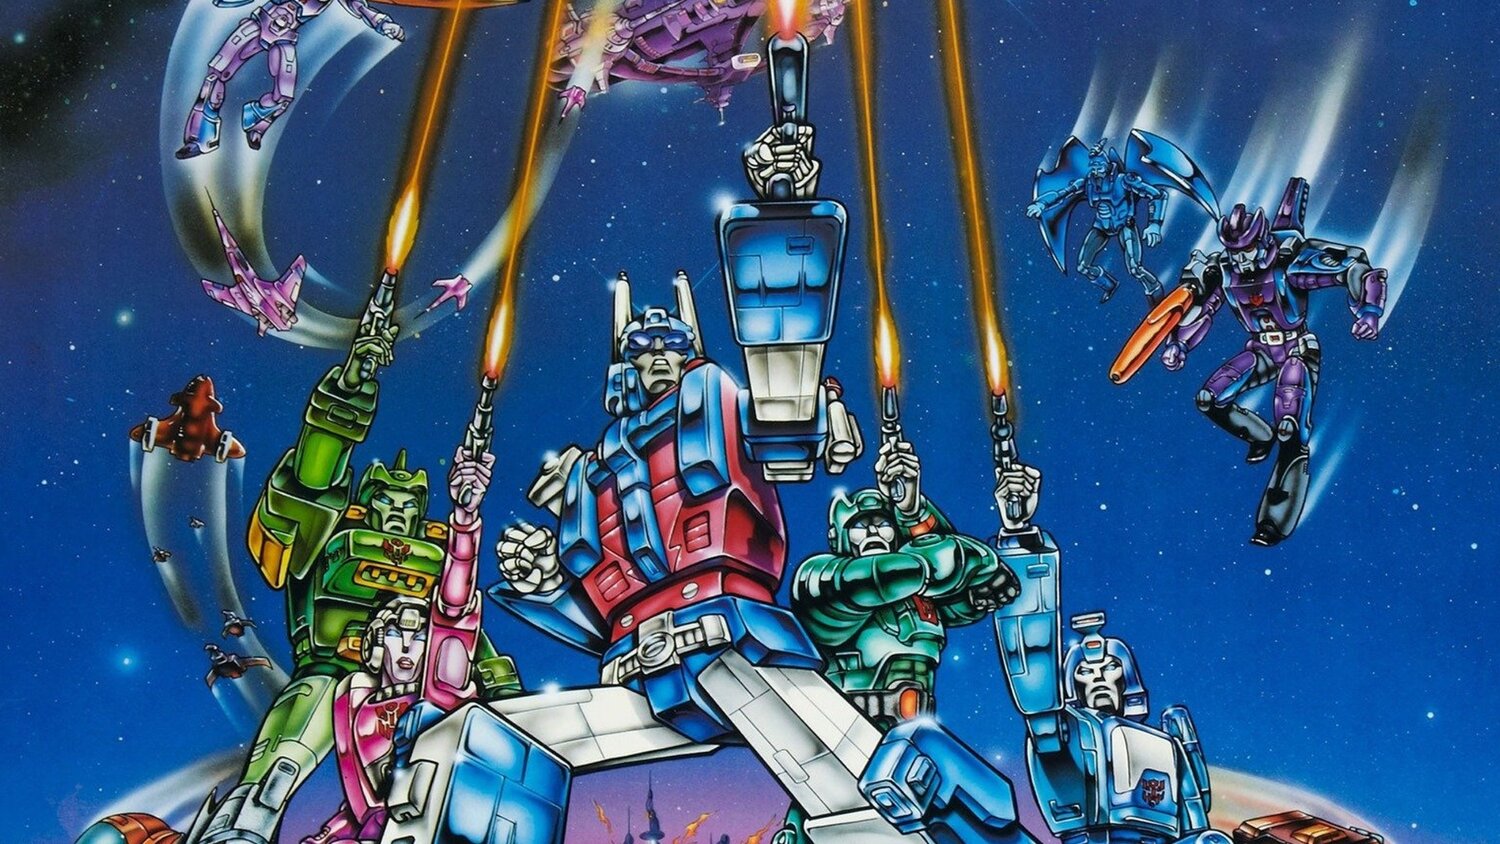 TRANSFORMERS: THE MOVIE Is Coming Back to Theaters for Its 35th Anniversary